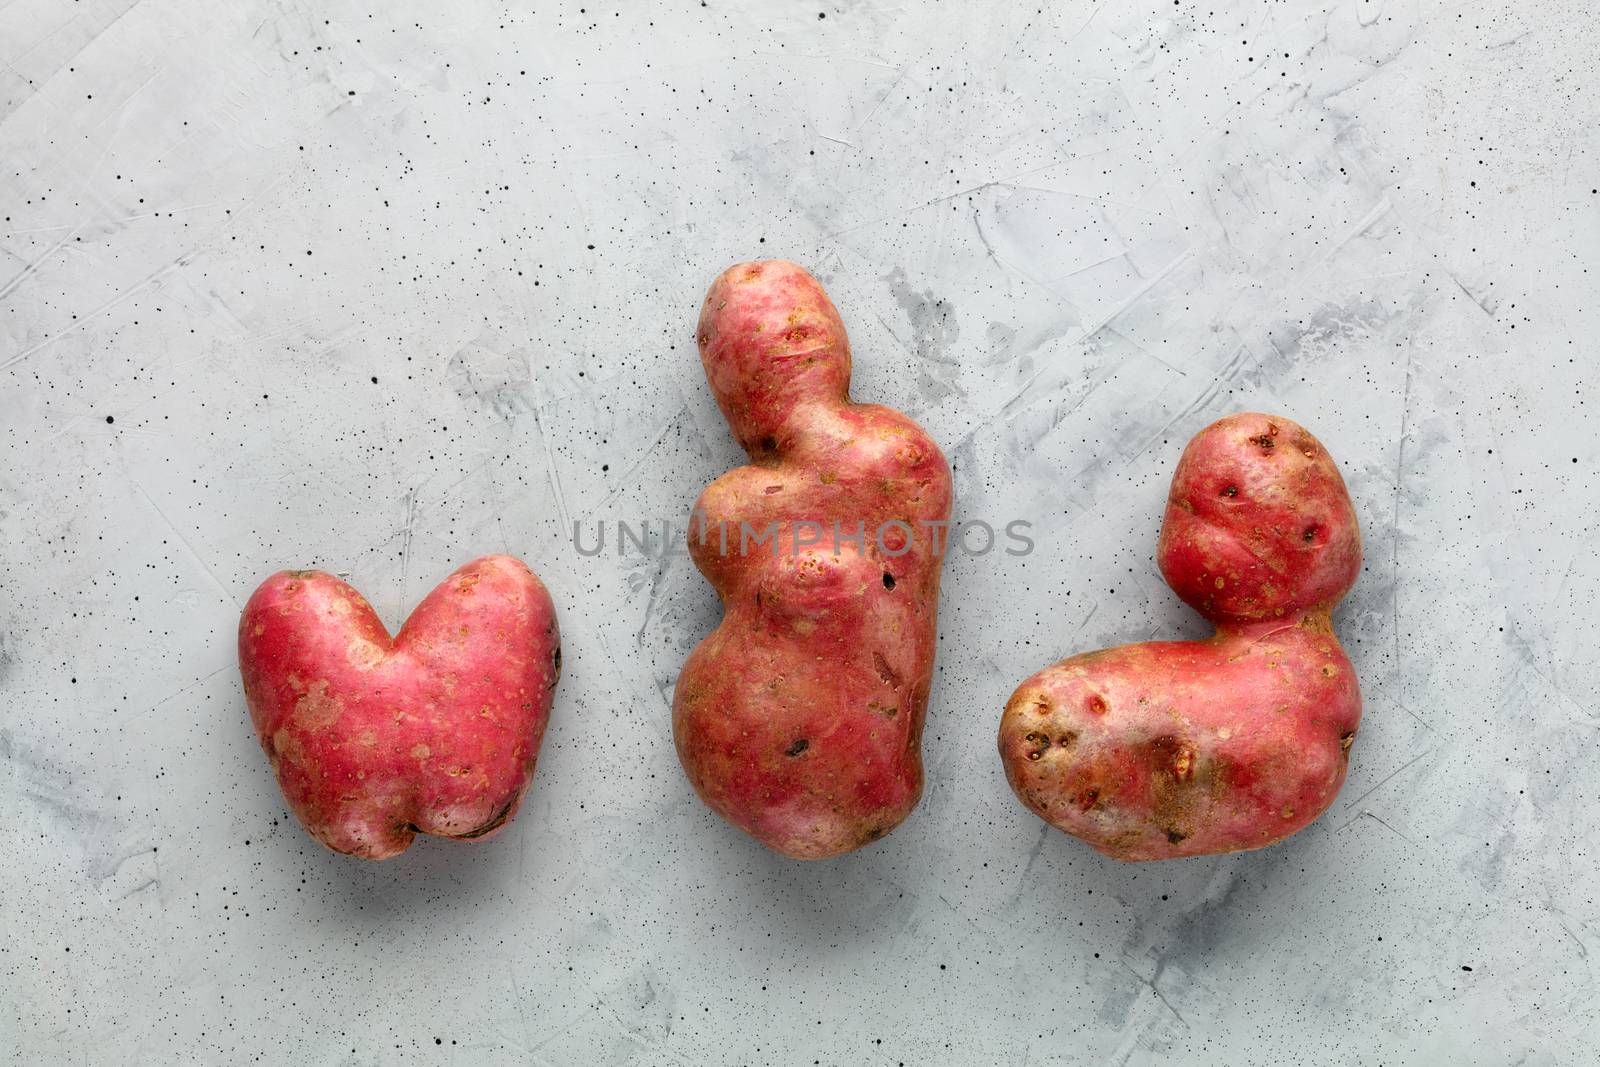 Ugly funny potato vegetables in the shape of a heart and other shapes on a gray concrete background. Vegetables or food waste concept. Top view, close-up, copy space.